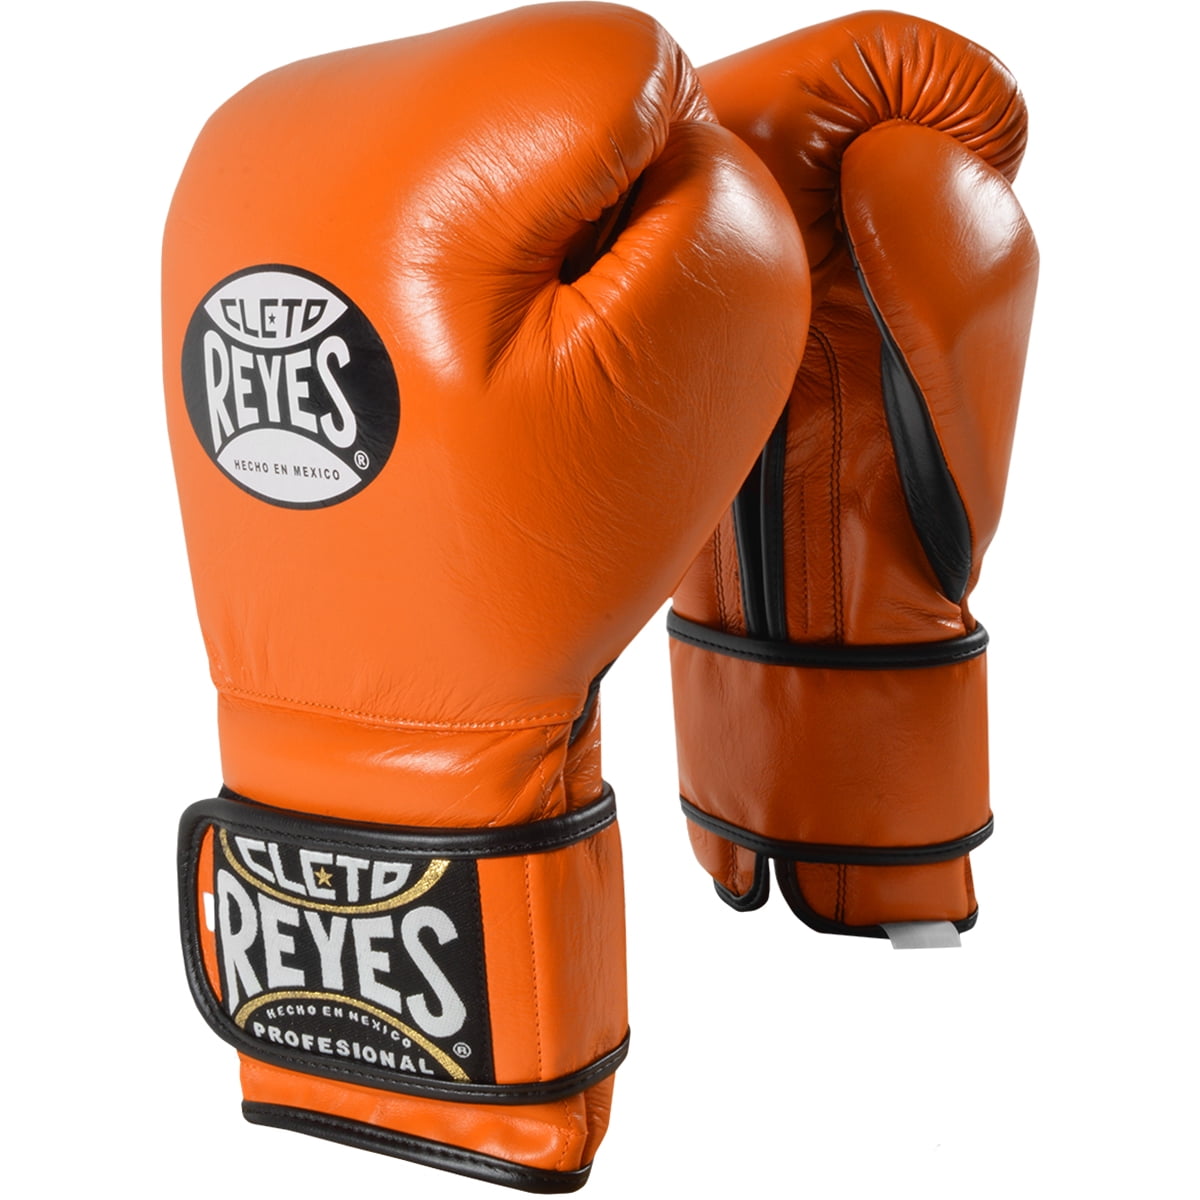 Cleto Reyes Hook and Loop Leather Training Boxing Gloves 16 oz Pro Style Gloves 